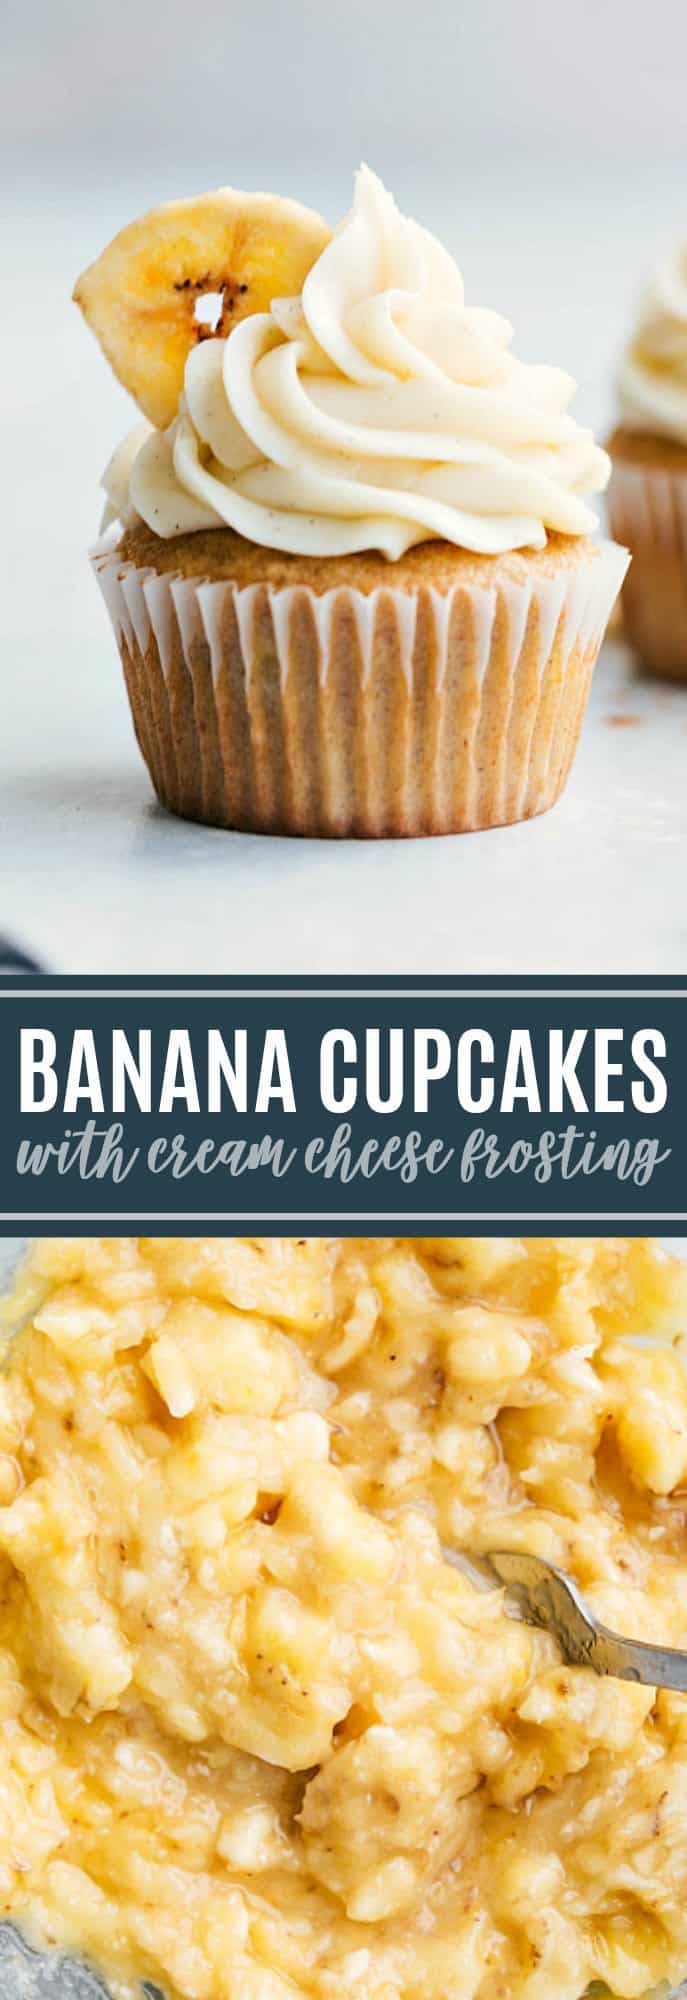 The ultimate BEST EVER banana cupcakes! Plus all the tips and tricks to make these perfect every-time! via chelseasmessyapron.com #cupcake #banana #dessert #bananacupcakes #easy #quick #recipes #cake #cupcakes #healthy #treat #bake #baked